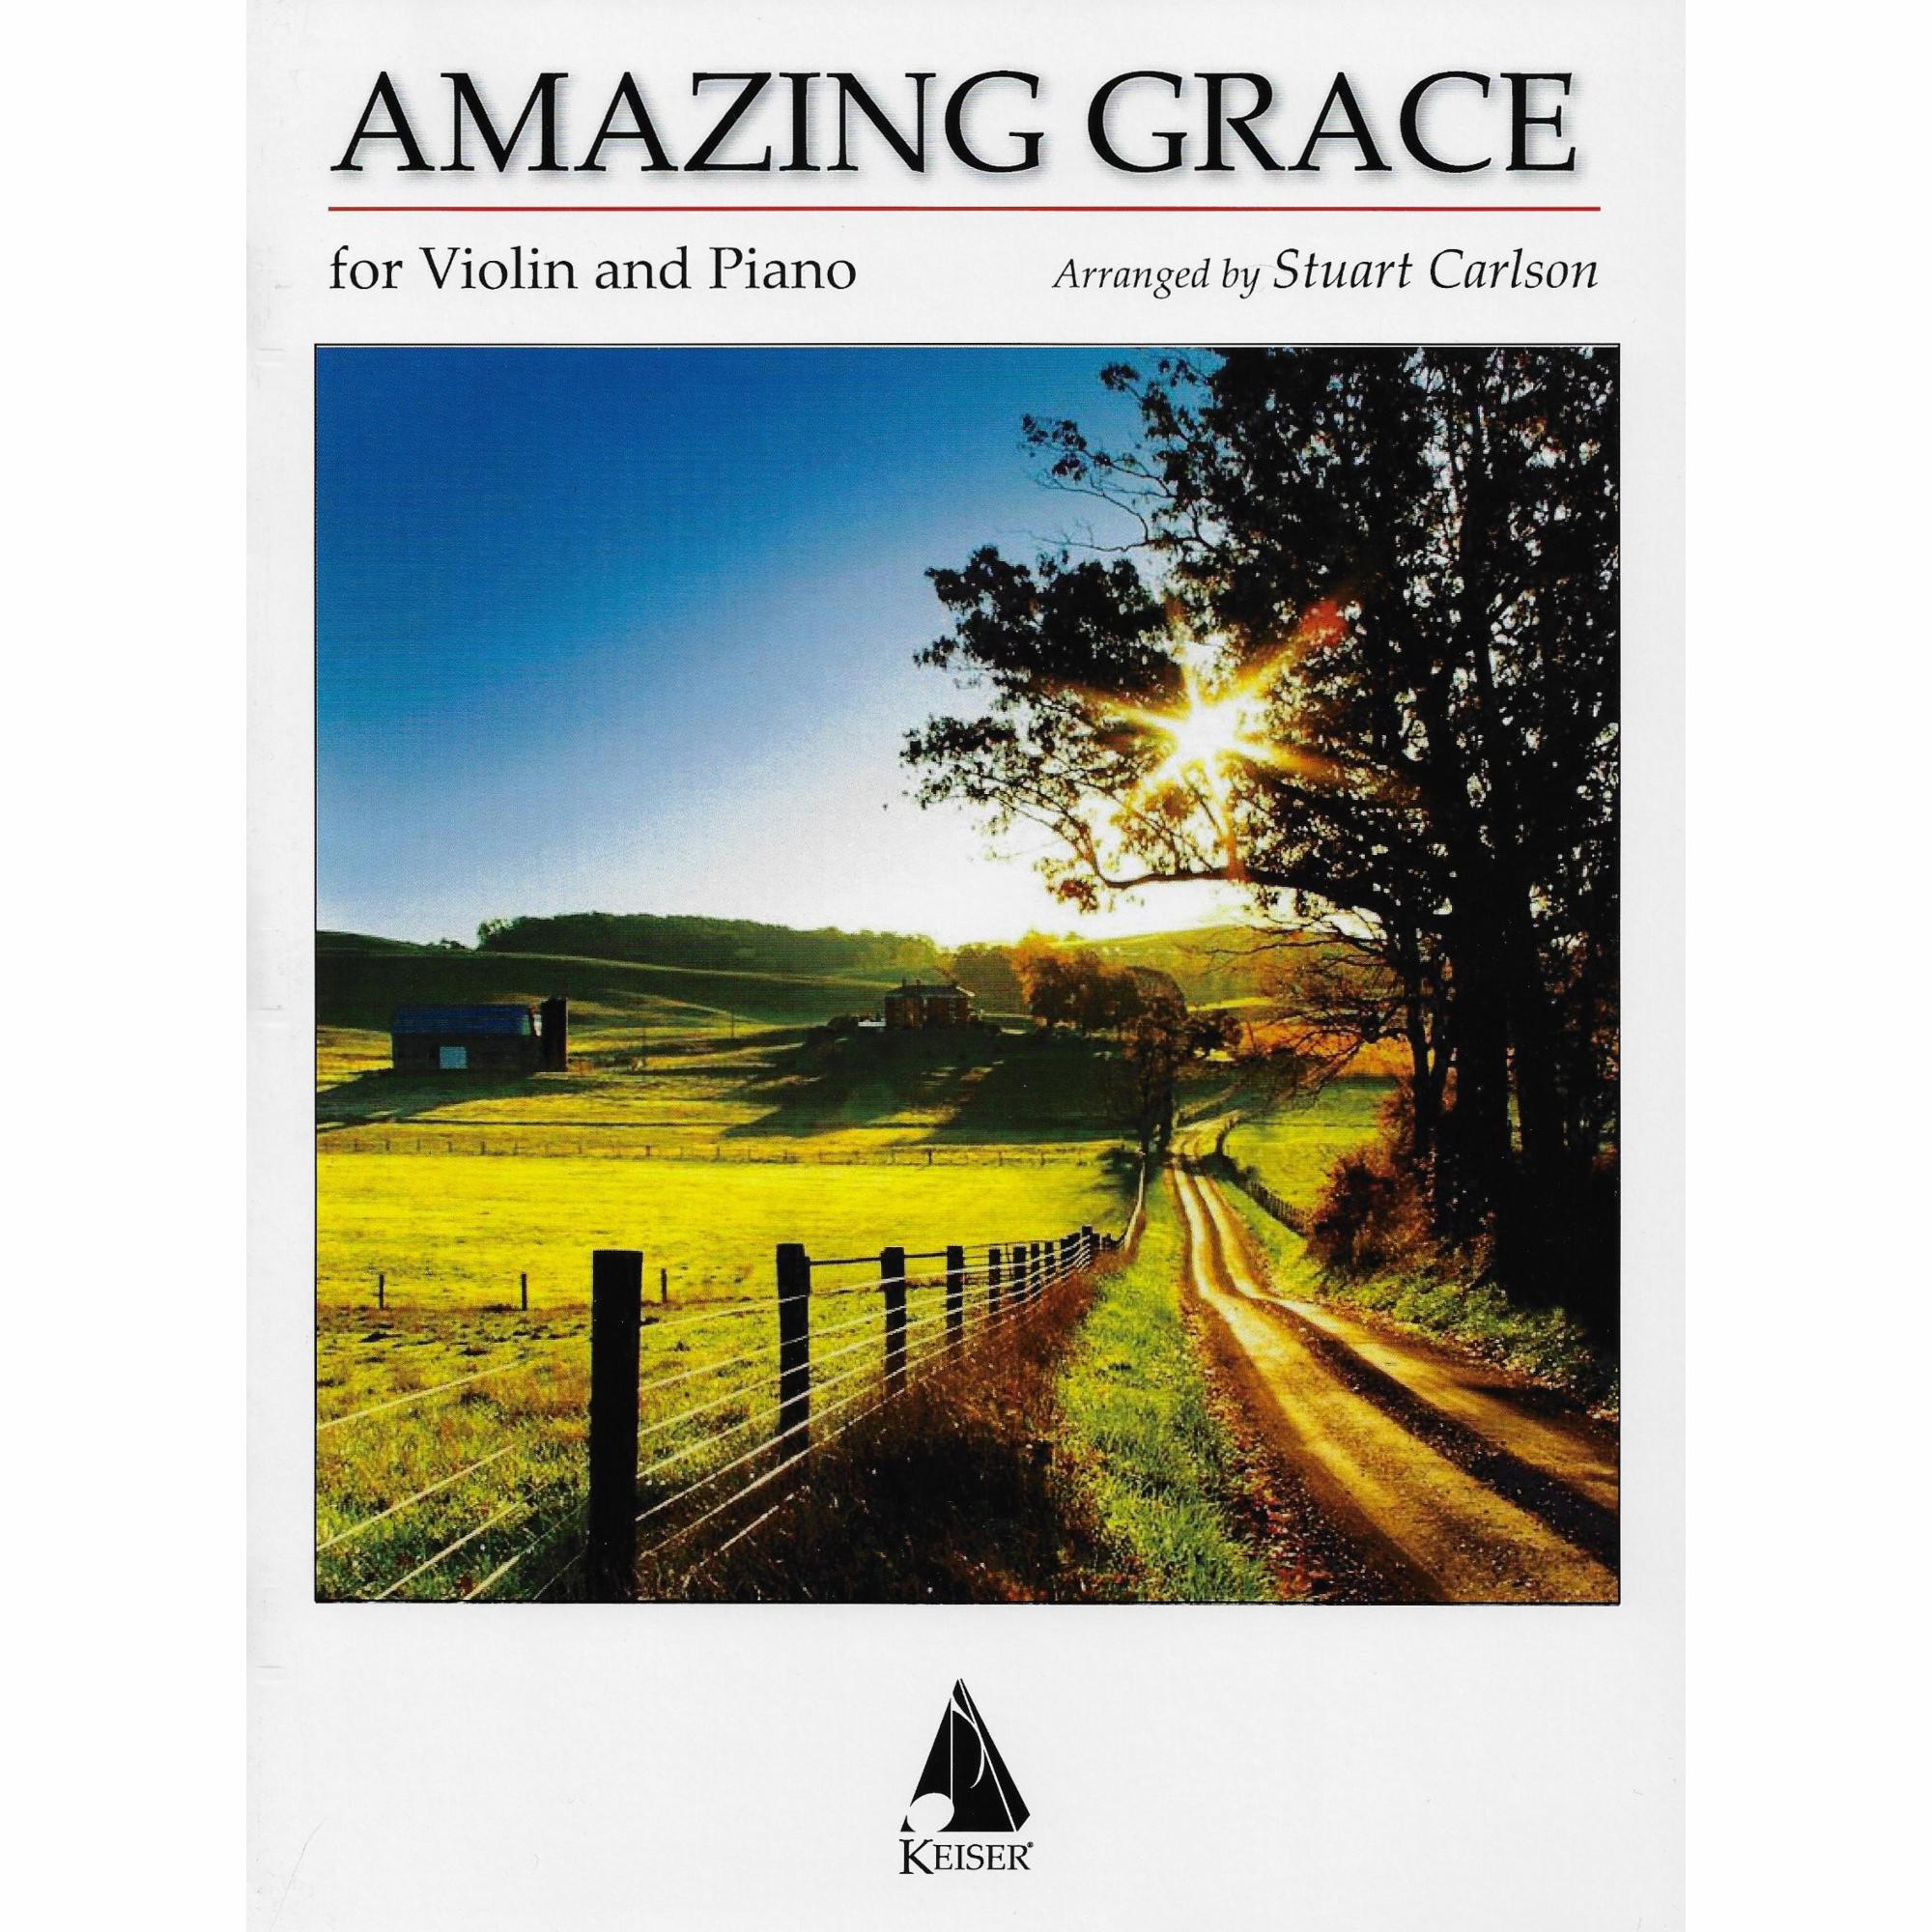 Amazing Grace for Violin and Piano